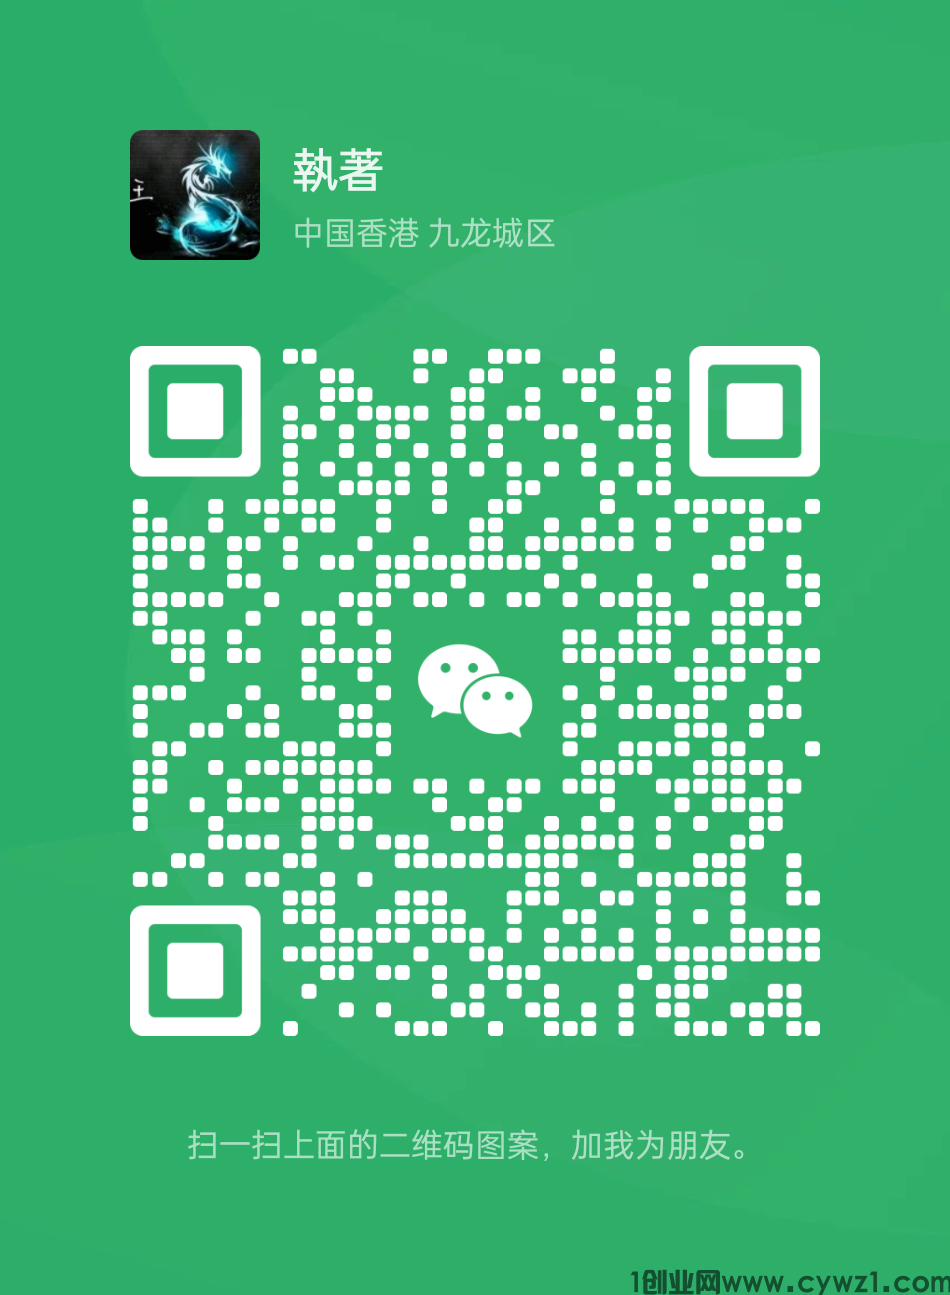 mmqrcode1684505724712.png